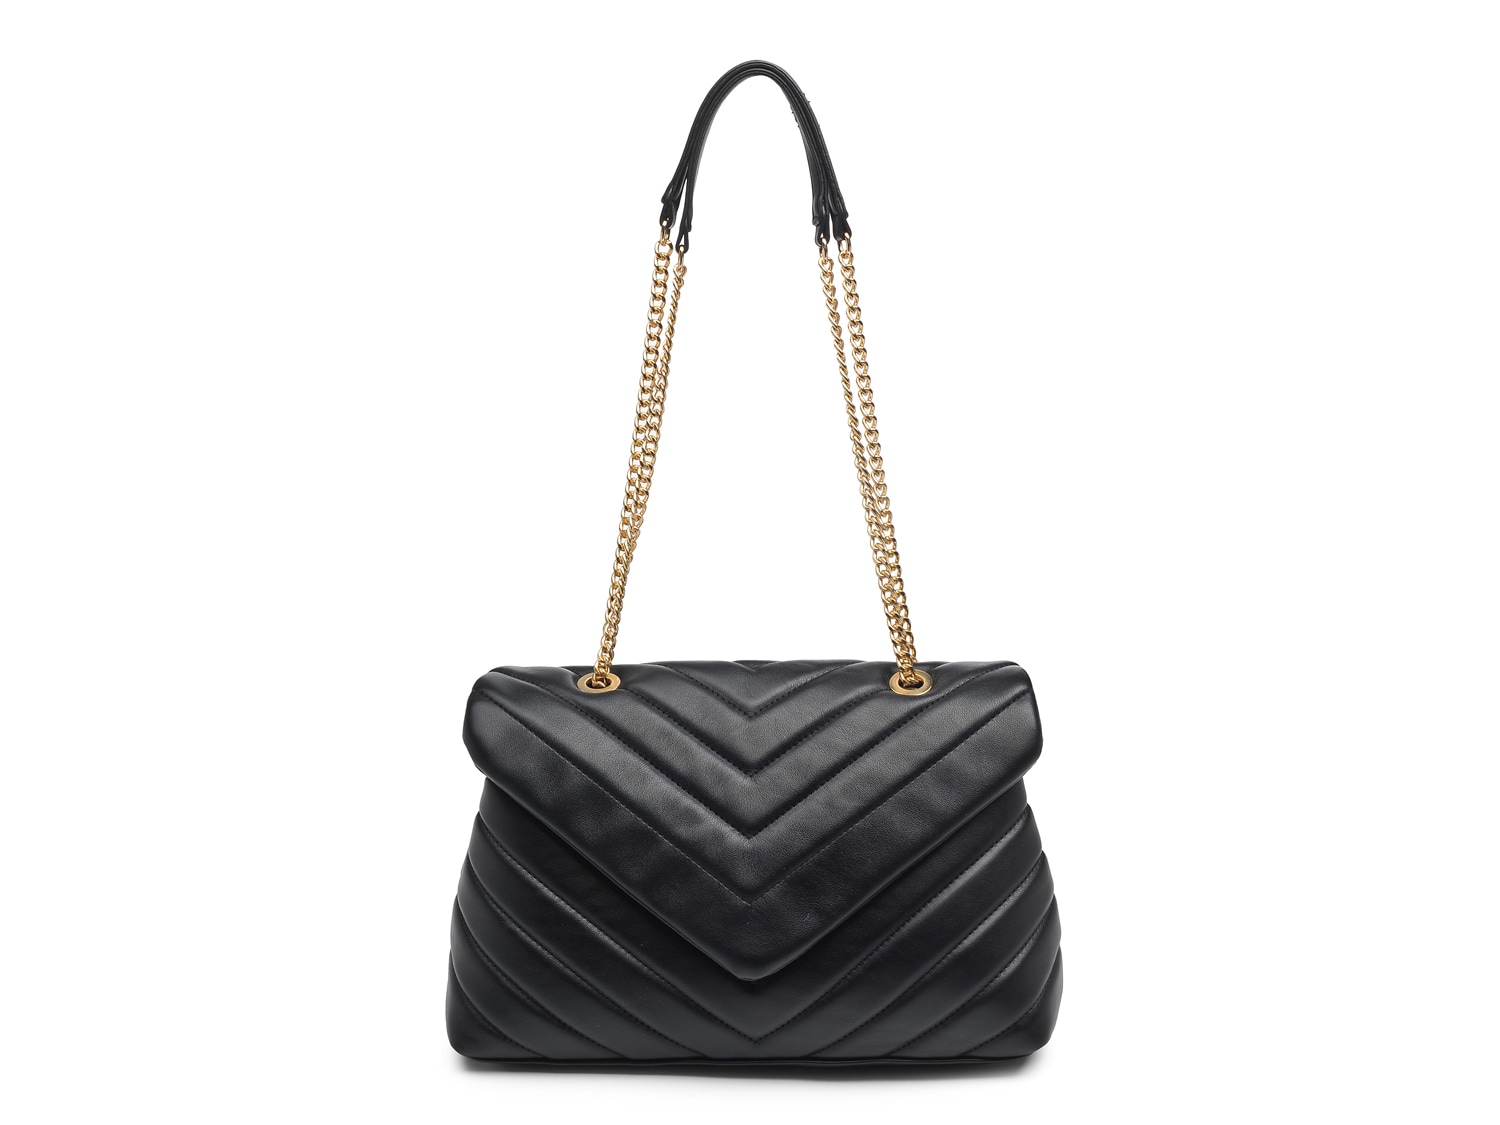 Urban Expressions Ivy Shoulder Bag - Free Shipping | DSW